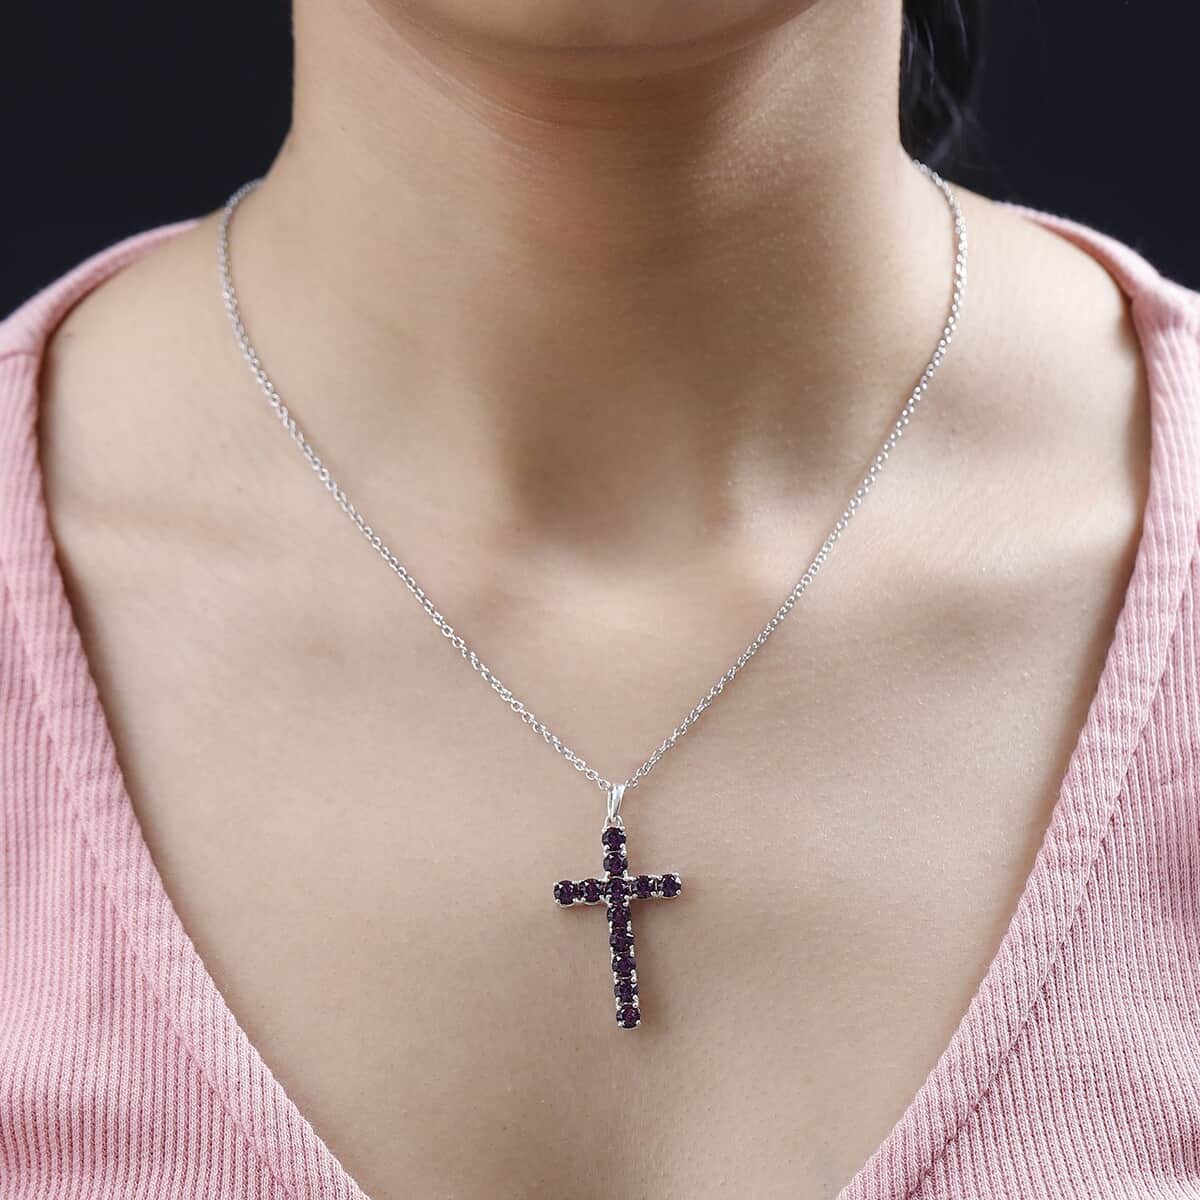 Designer Premium Foilback Amethyst Color Austrian Crystal Cross Pendant in Sterling Silver with Stainless Steel Necklace 20 Inches image number 2